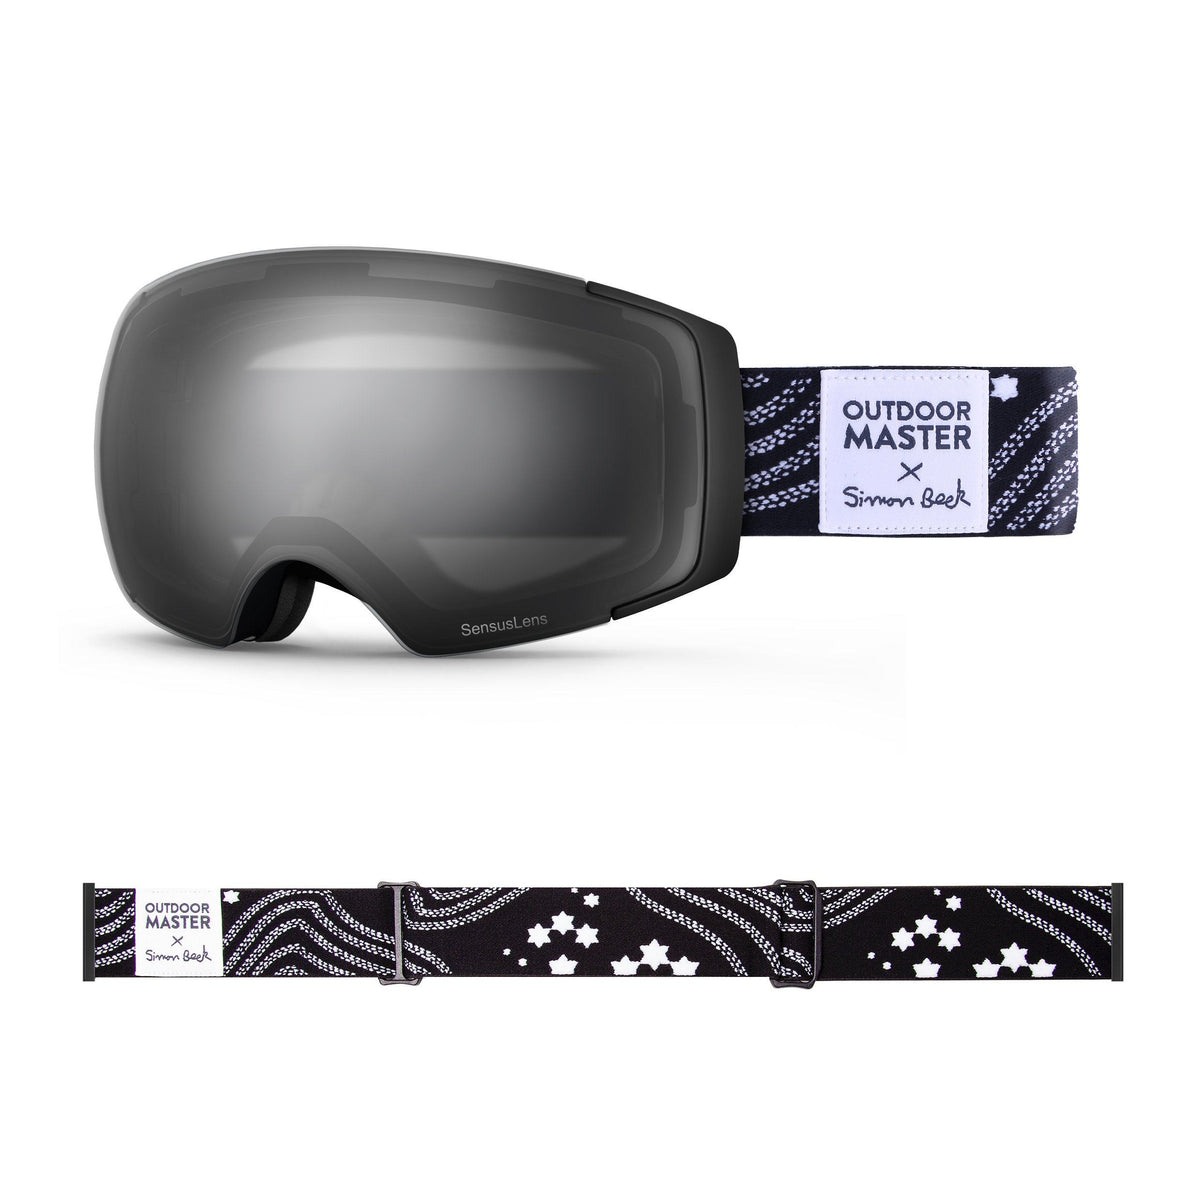 OutdoorMaster x Simon Beck Ski Goggles Pro Series - Snowshoeing Art Limited Edition OutdoorMaster SensusLens VLT 13-60% From Light to Dark Grey Star Road-Black